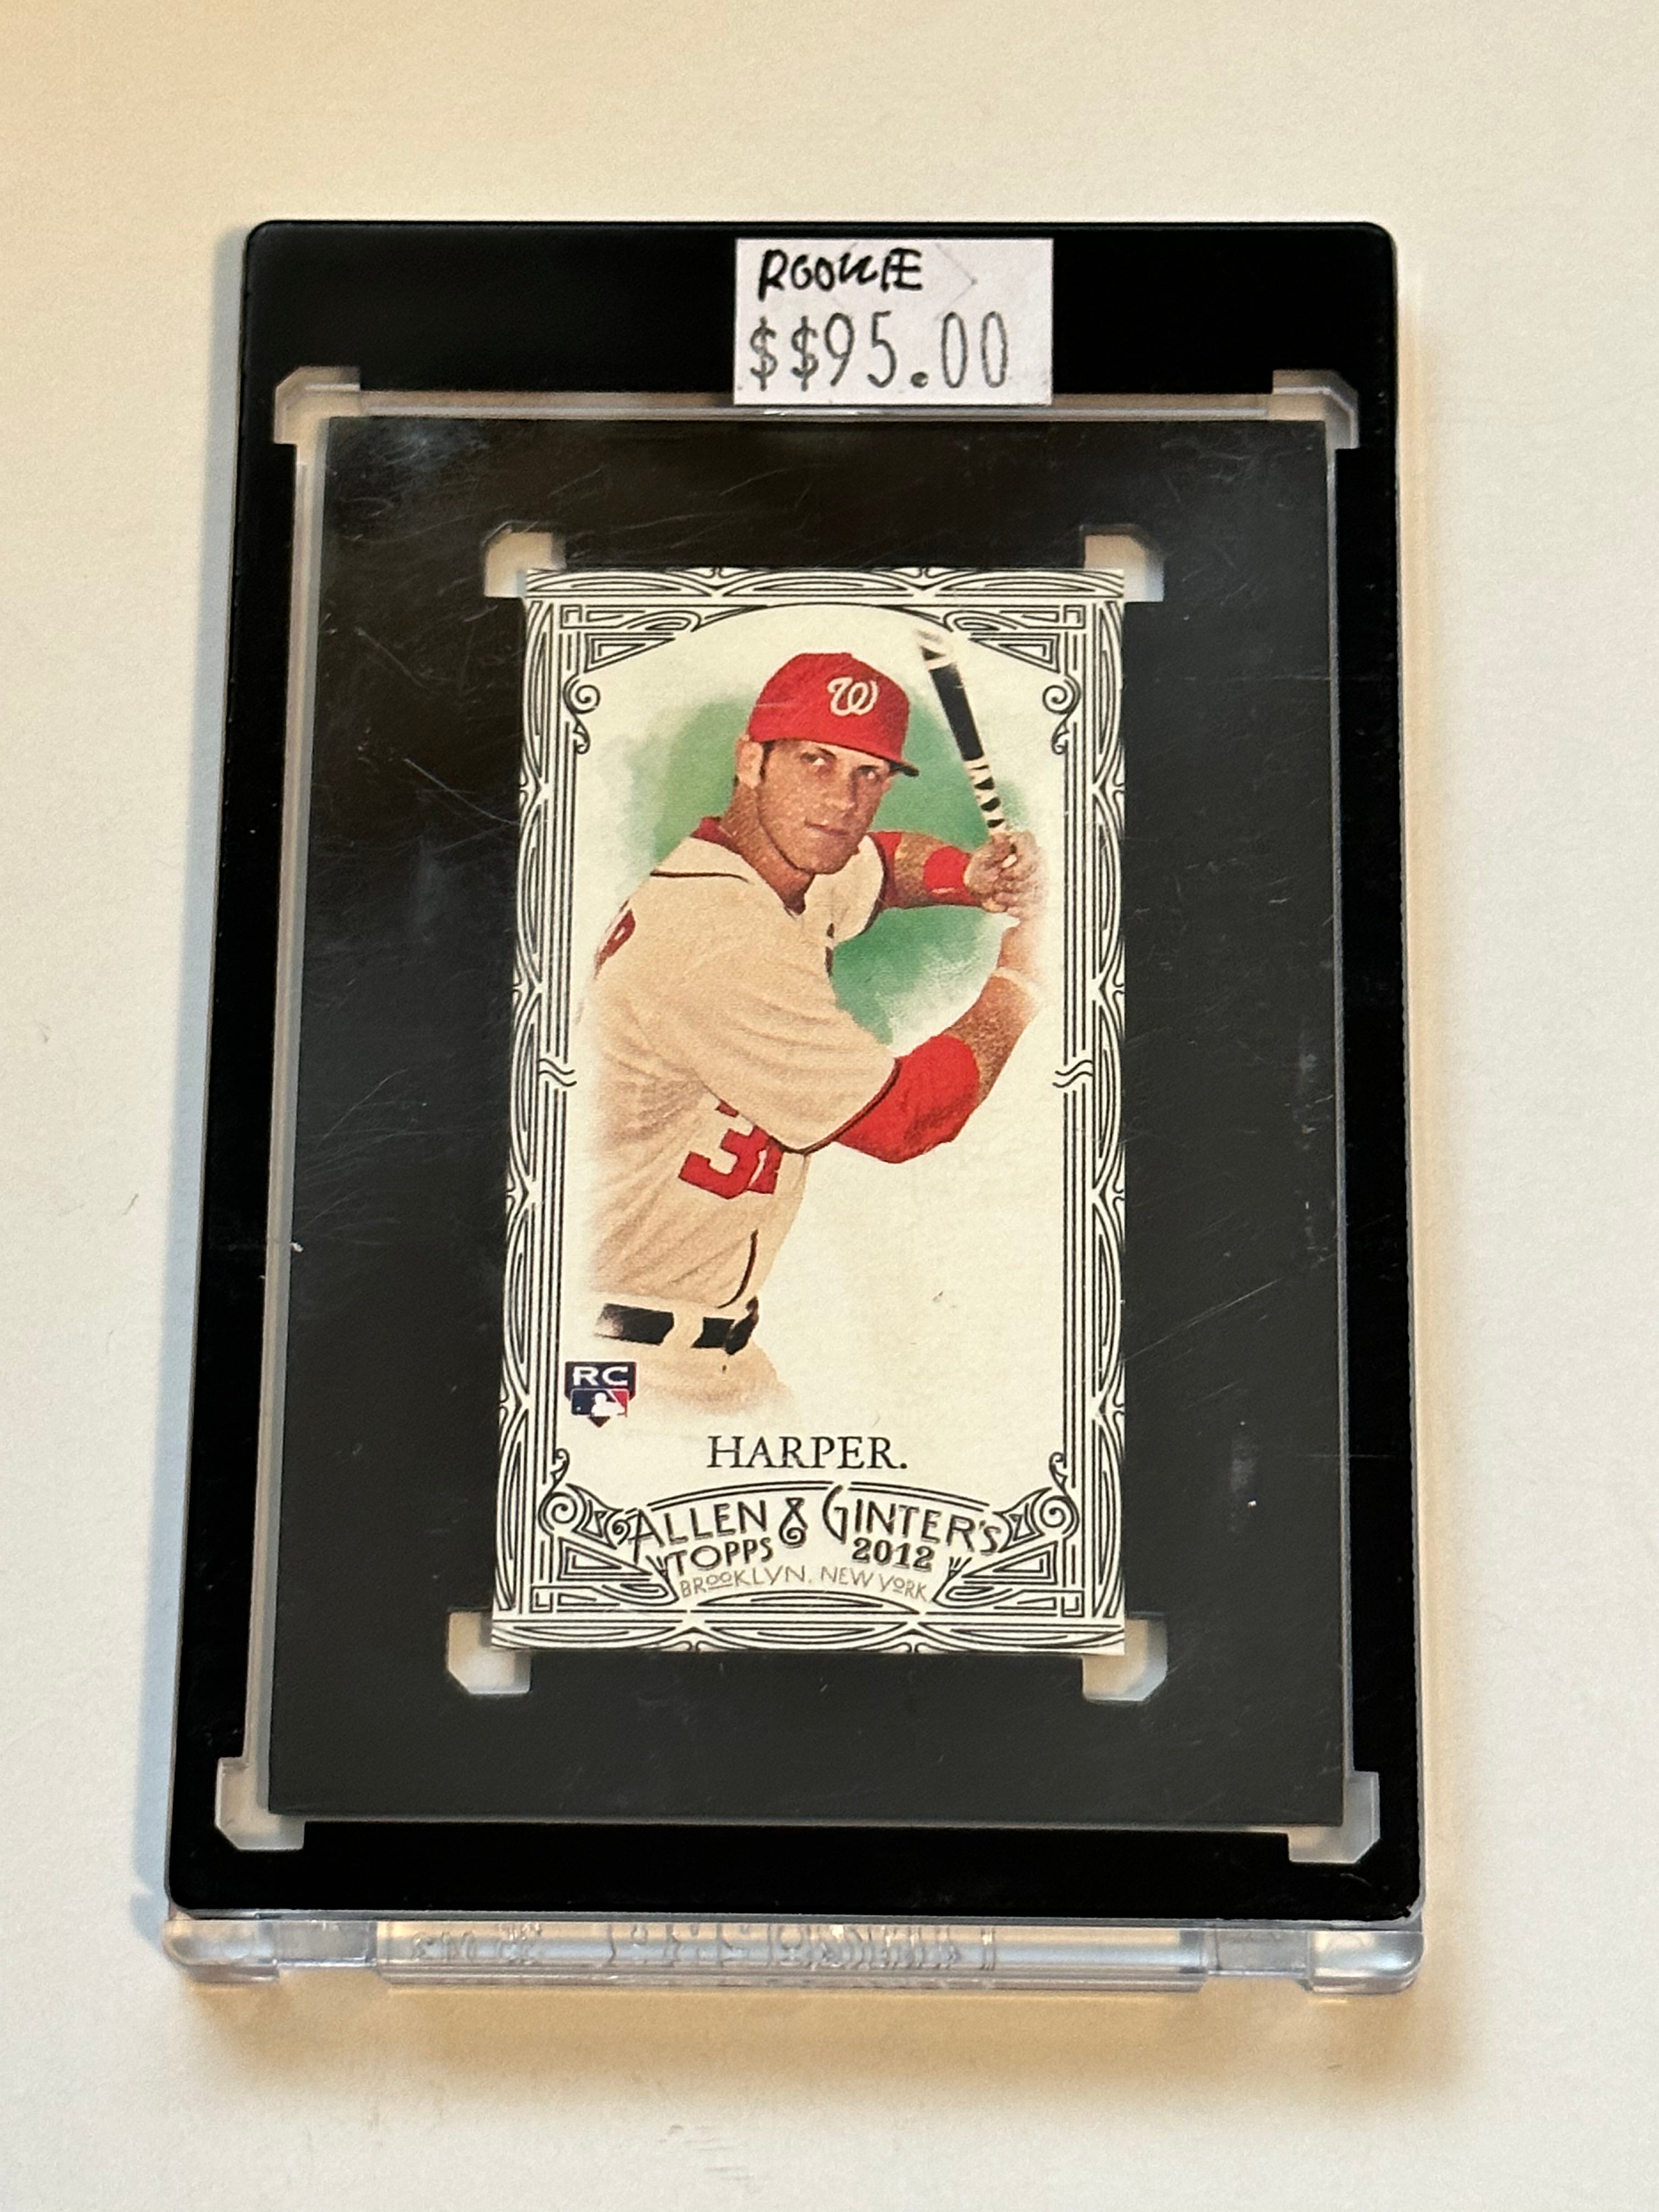 Bryce Harper Allen and Ginters baseball rookie card